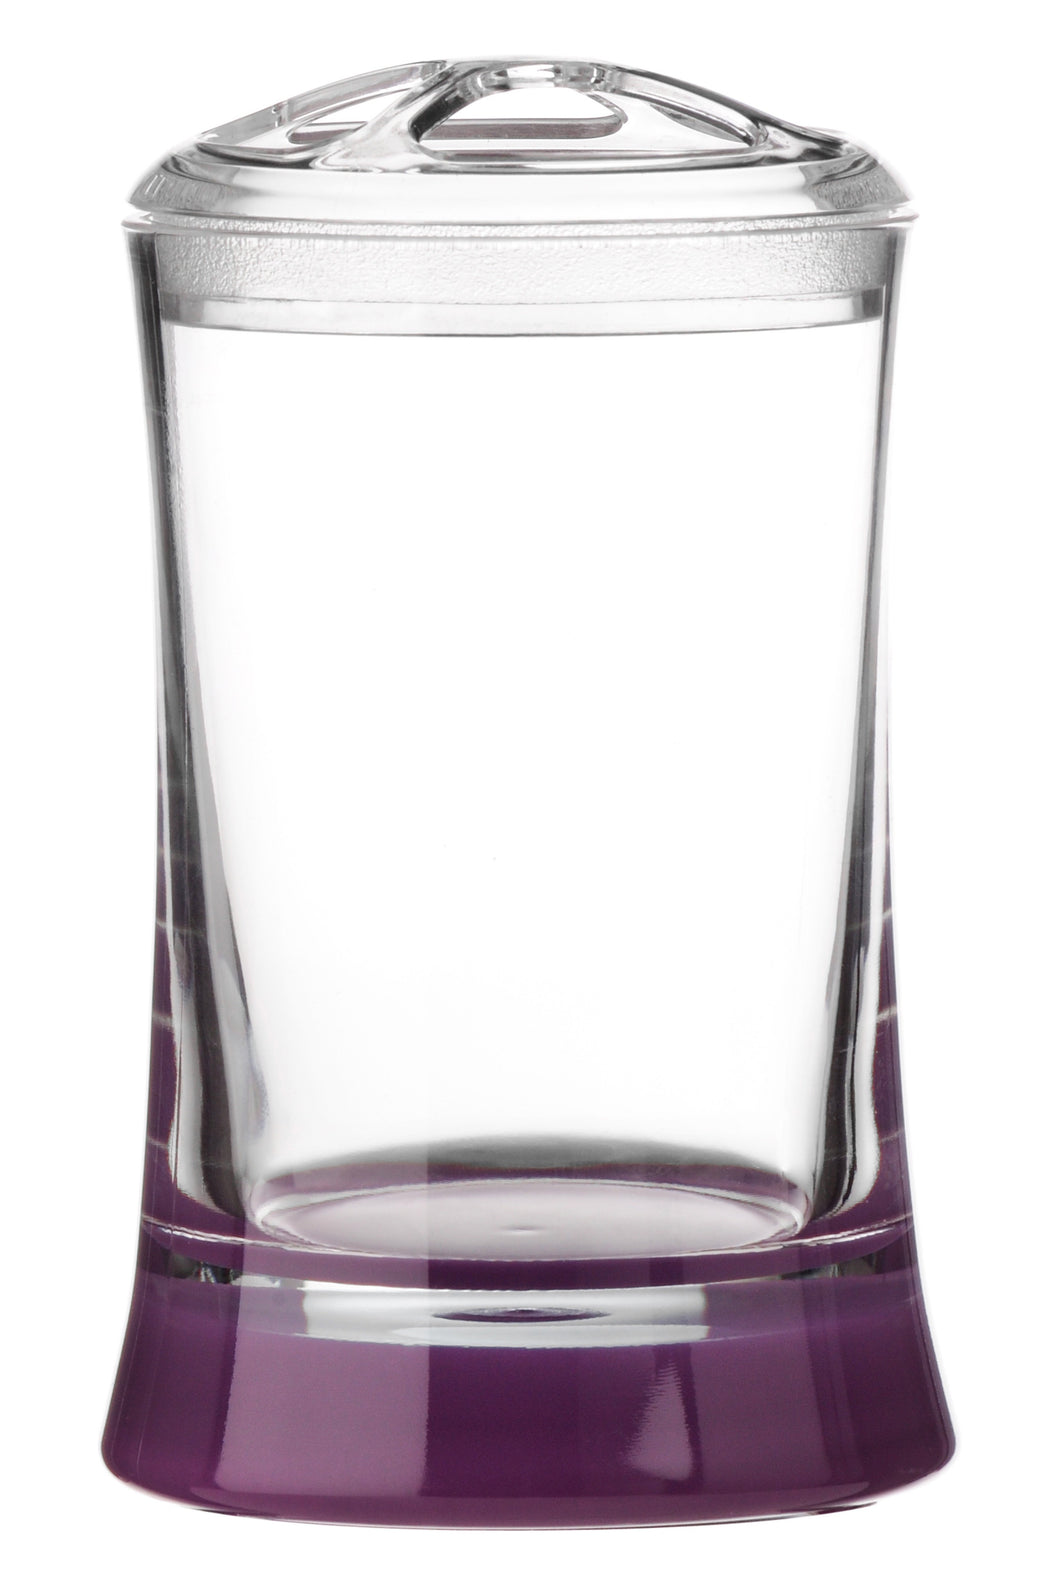 PREMIER PURPLE/CLEAR TOOTHBRUSH HOLDER ACRYLIC- 1601391